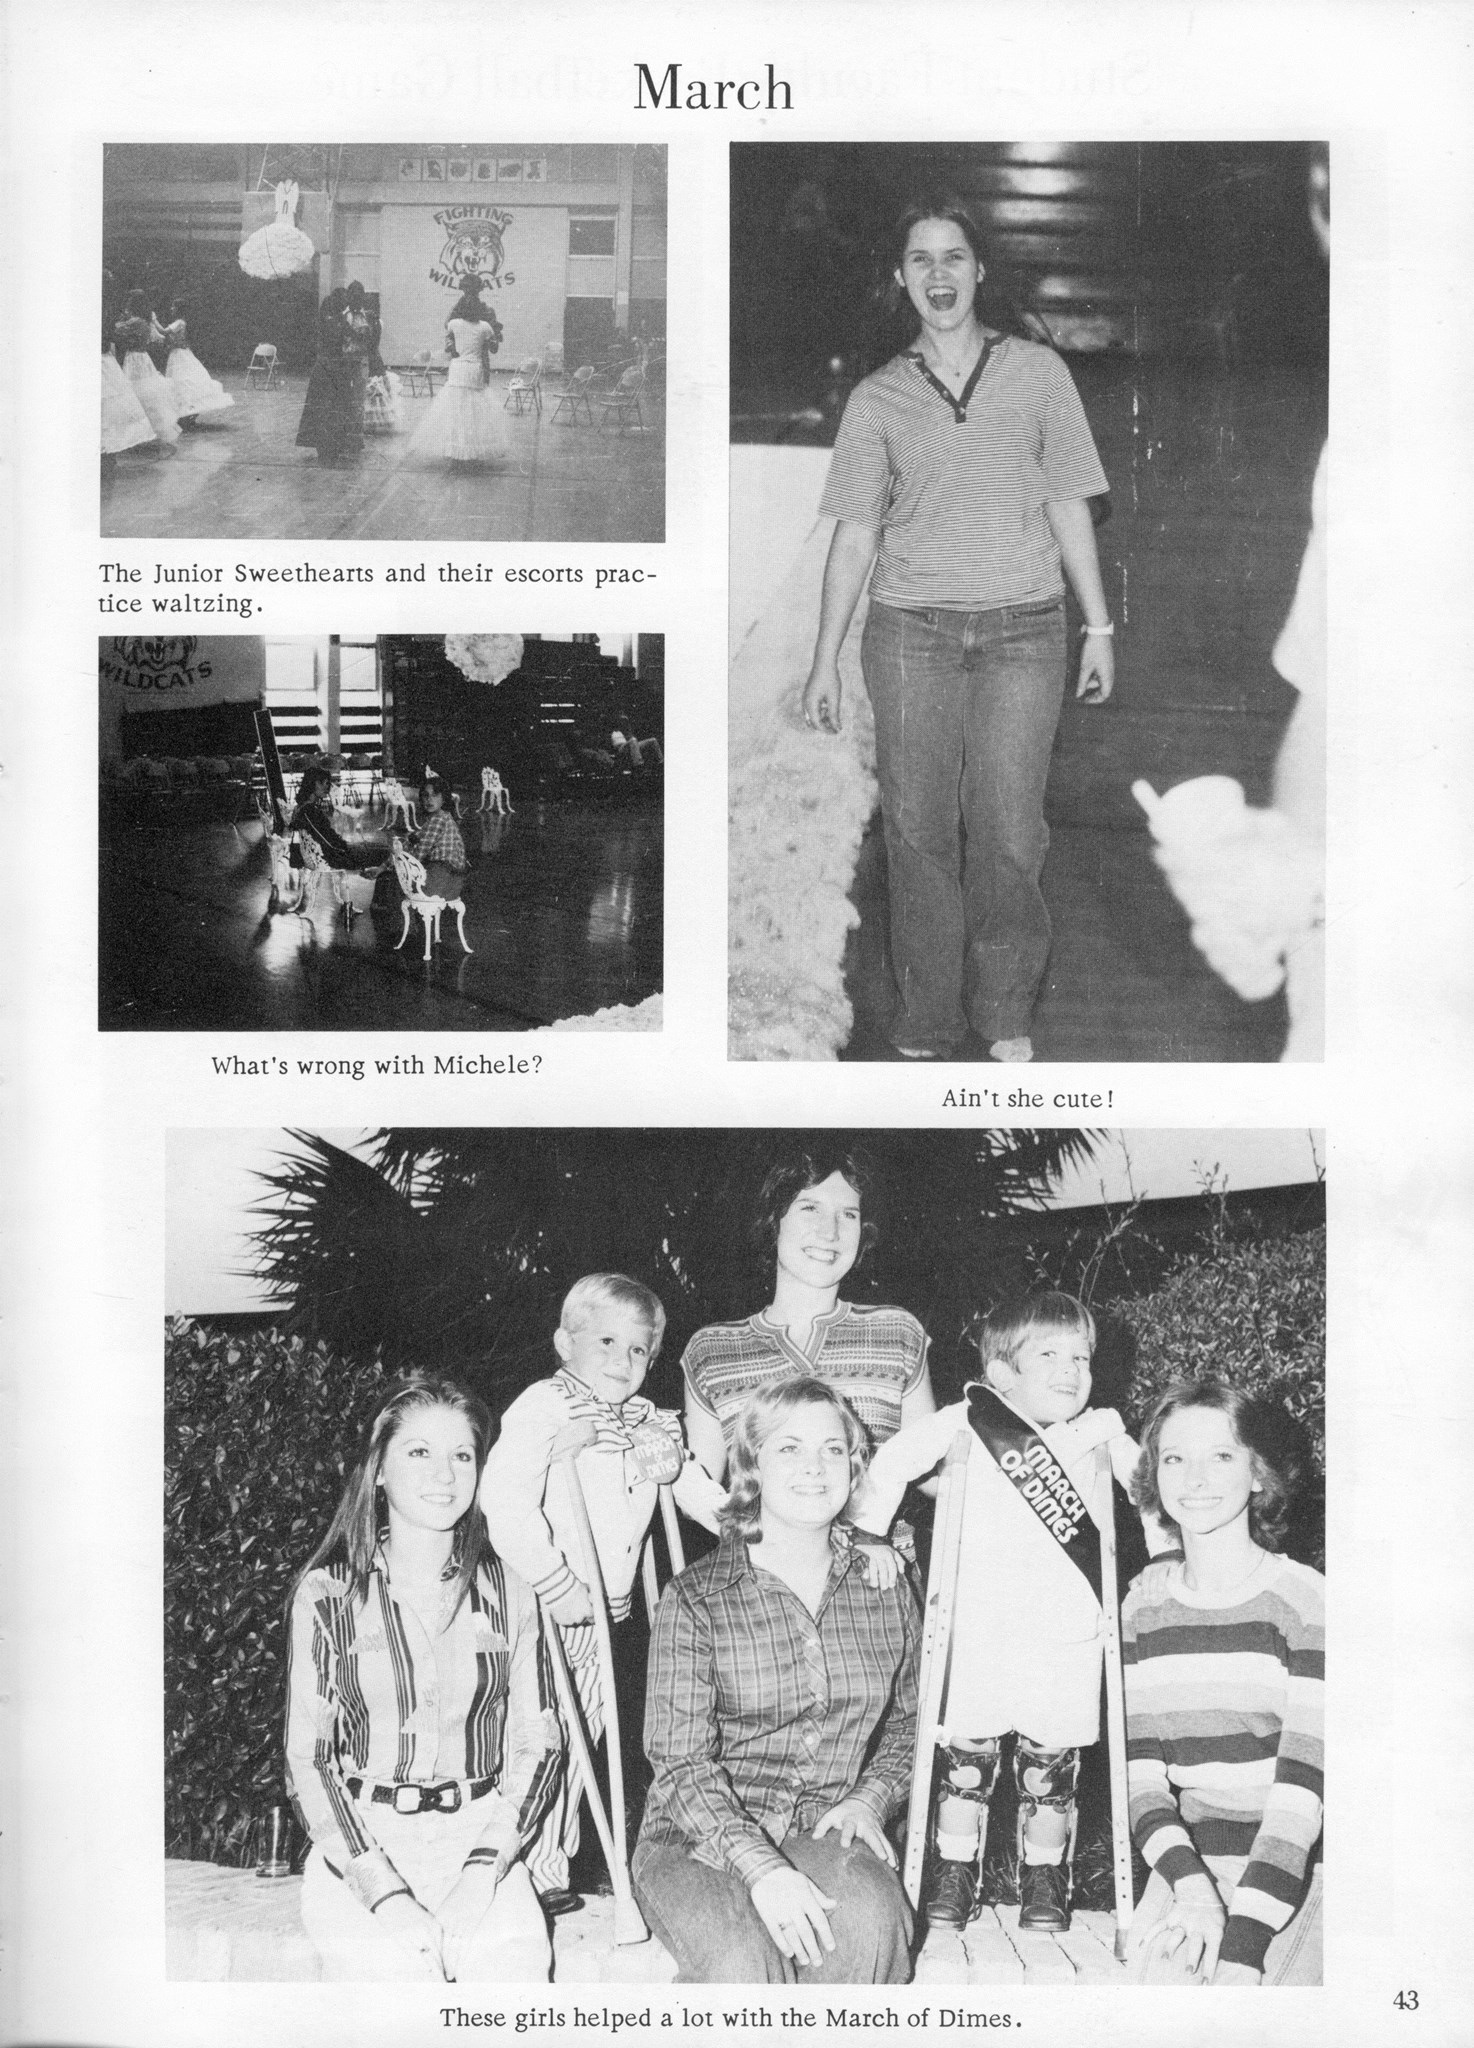 ../../../Images/Large/1977/Arclight-1977-pg0043.jpg